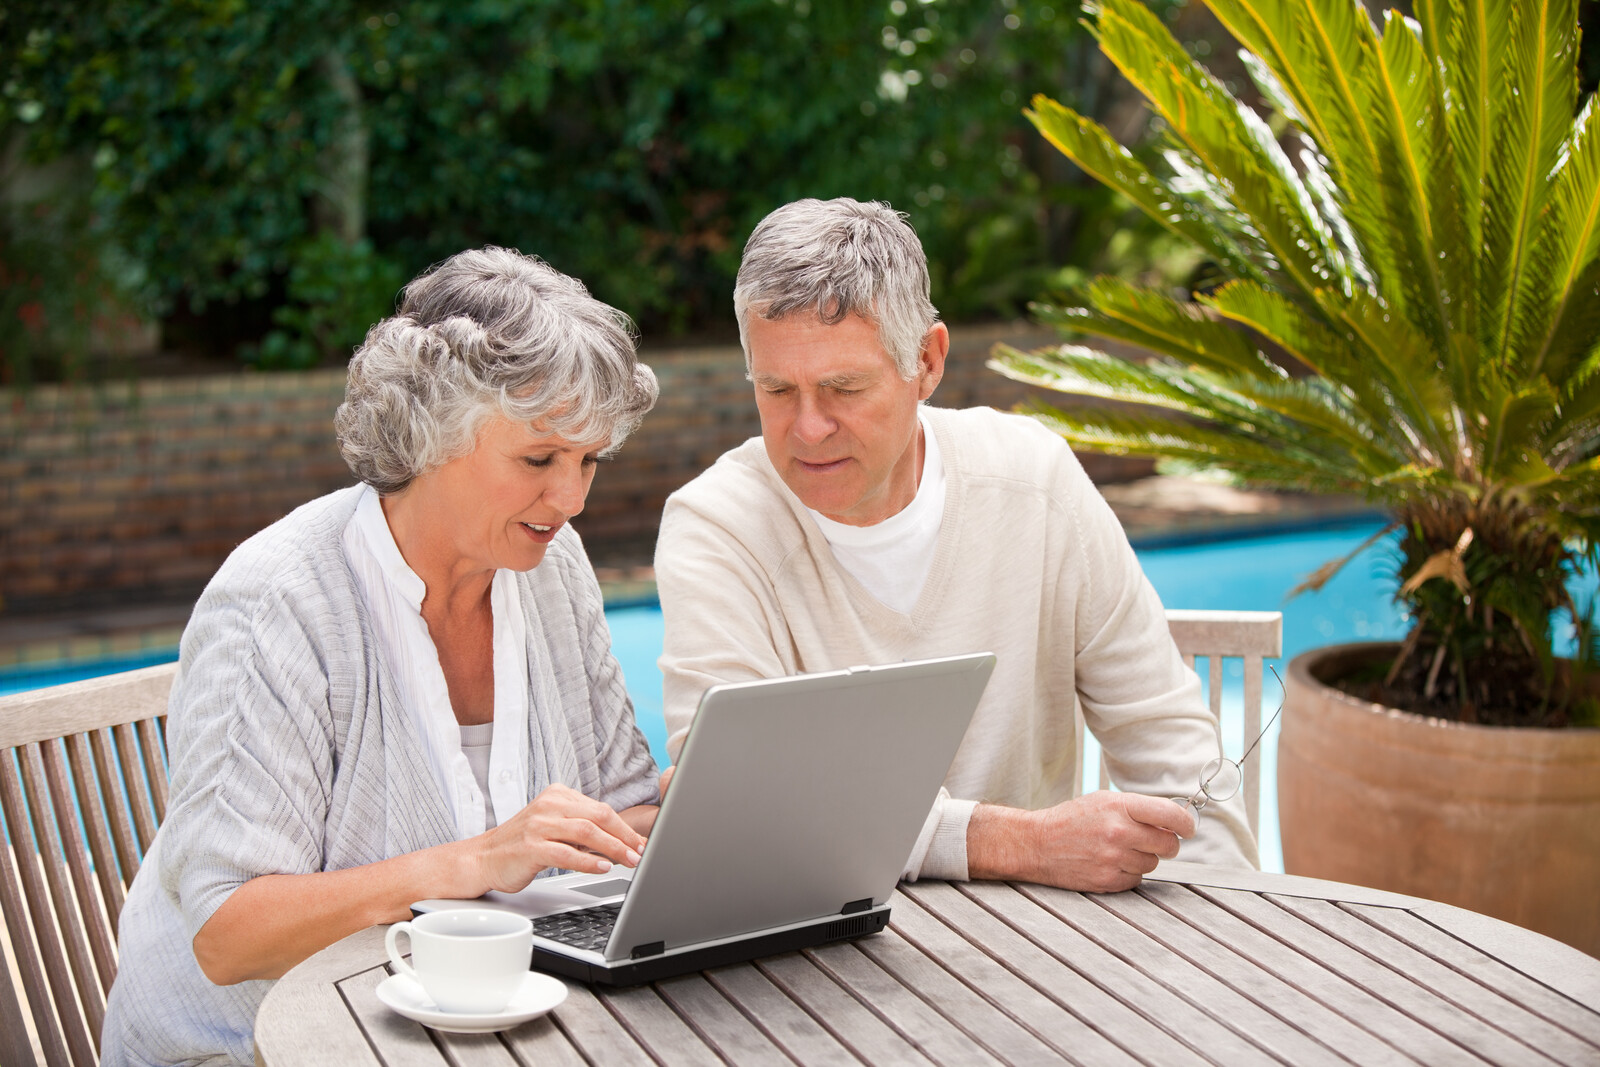 Senior couple looking at a computer while sitting outside at a wood picnic table near a pool - represents seniors ordering vacation certificate